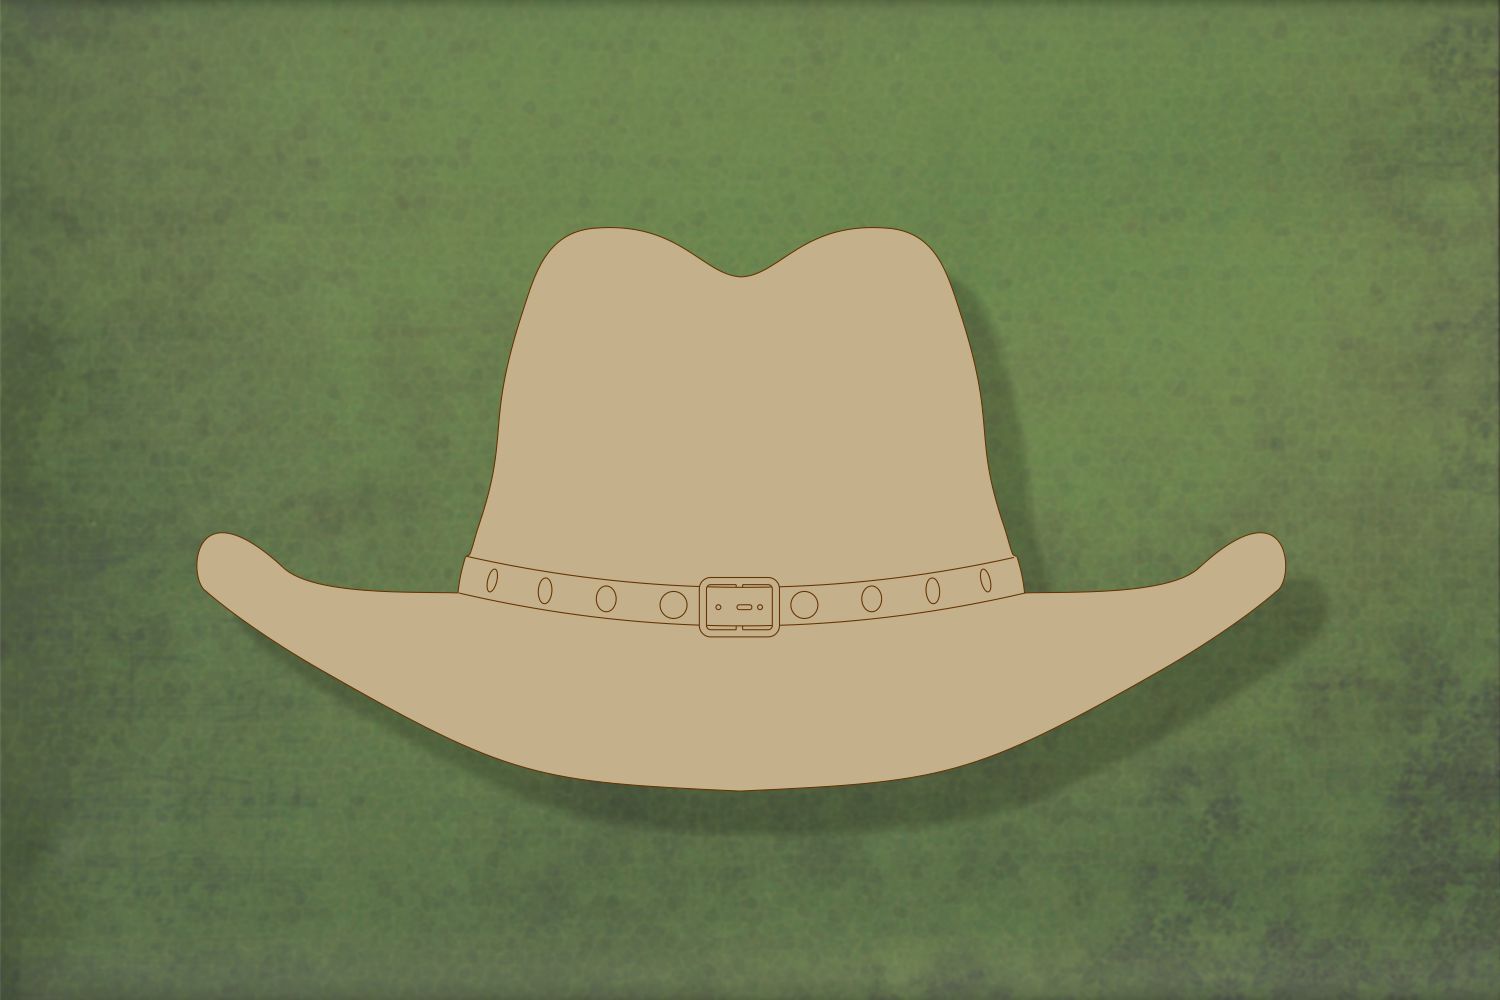 Laser cut, blank wooden Stetson cowboy hat with etched detail shape for craft